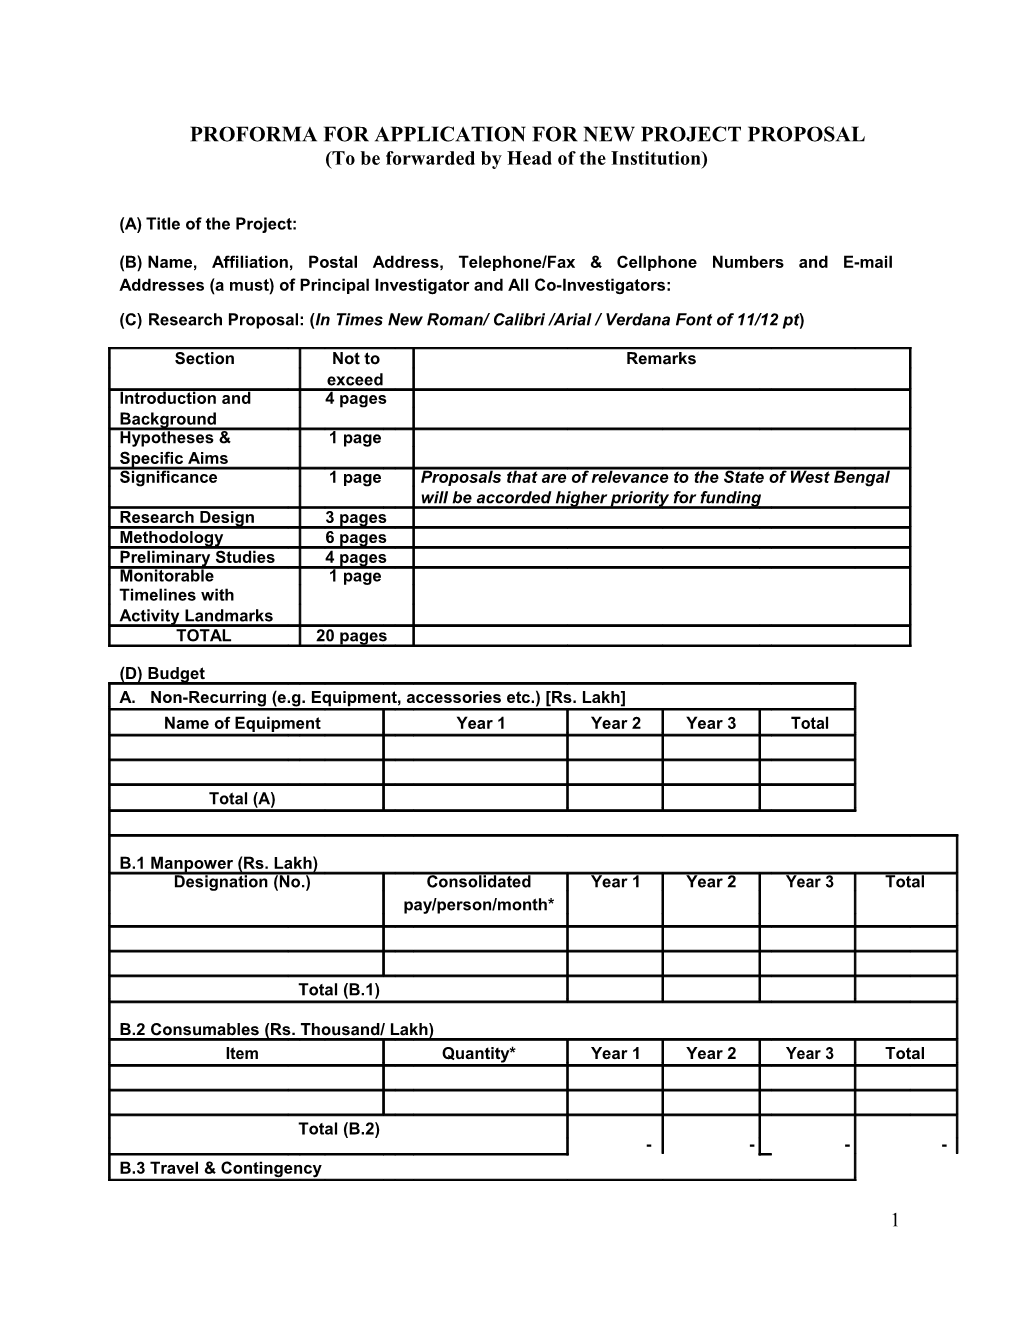 Proforma for Application for New Project Proposal